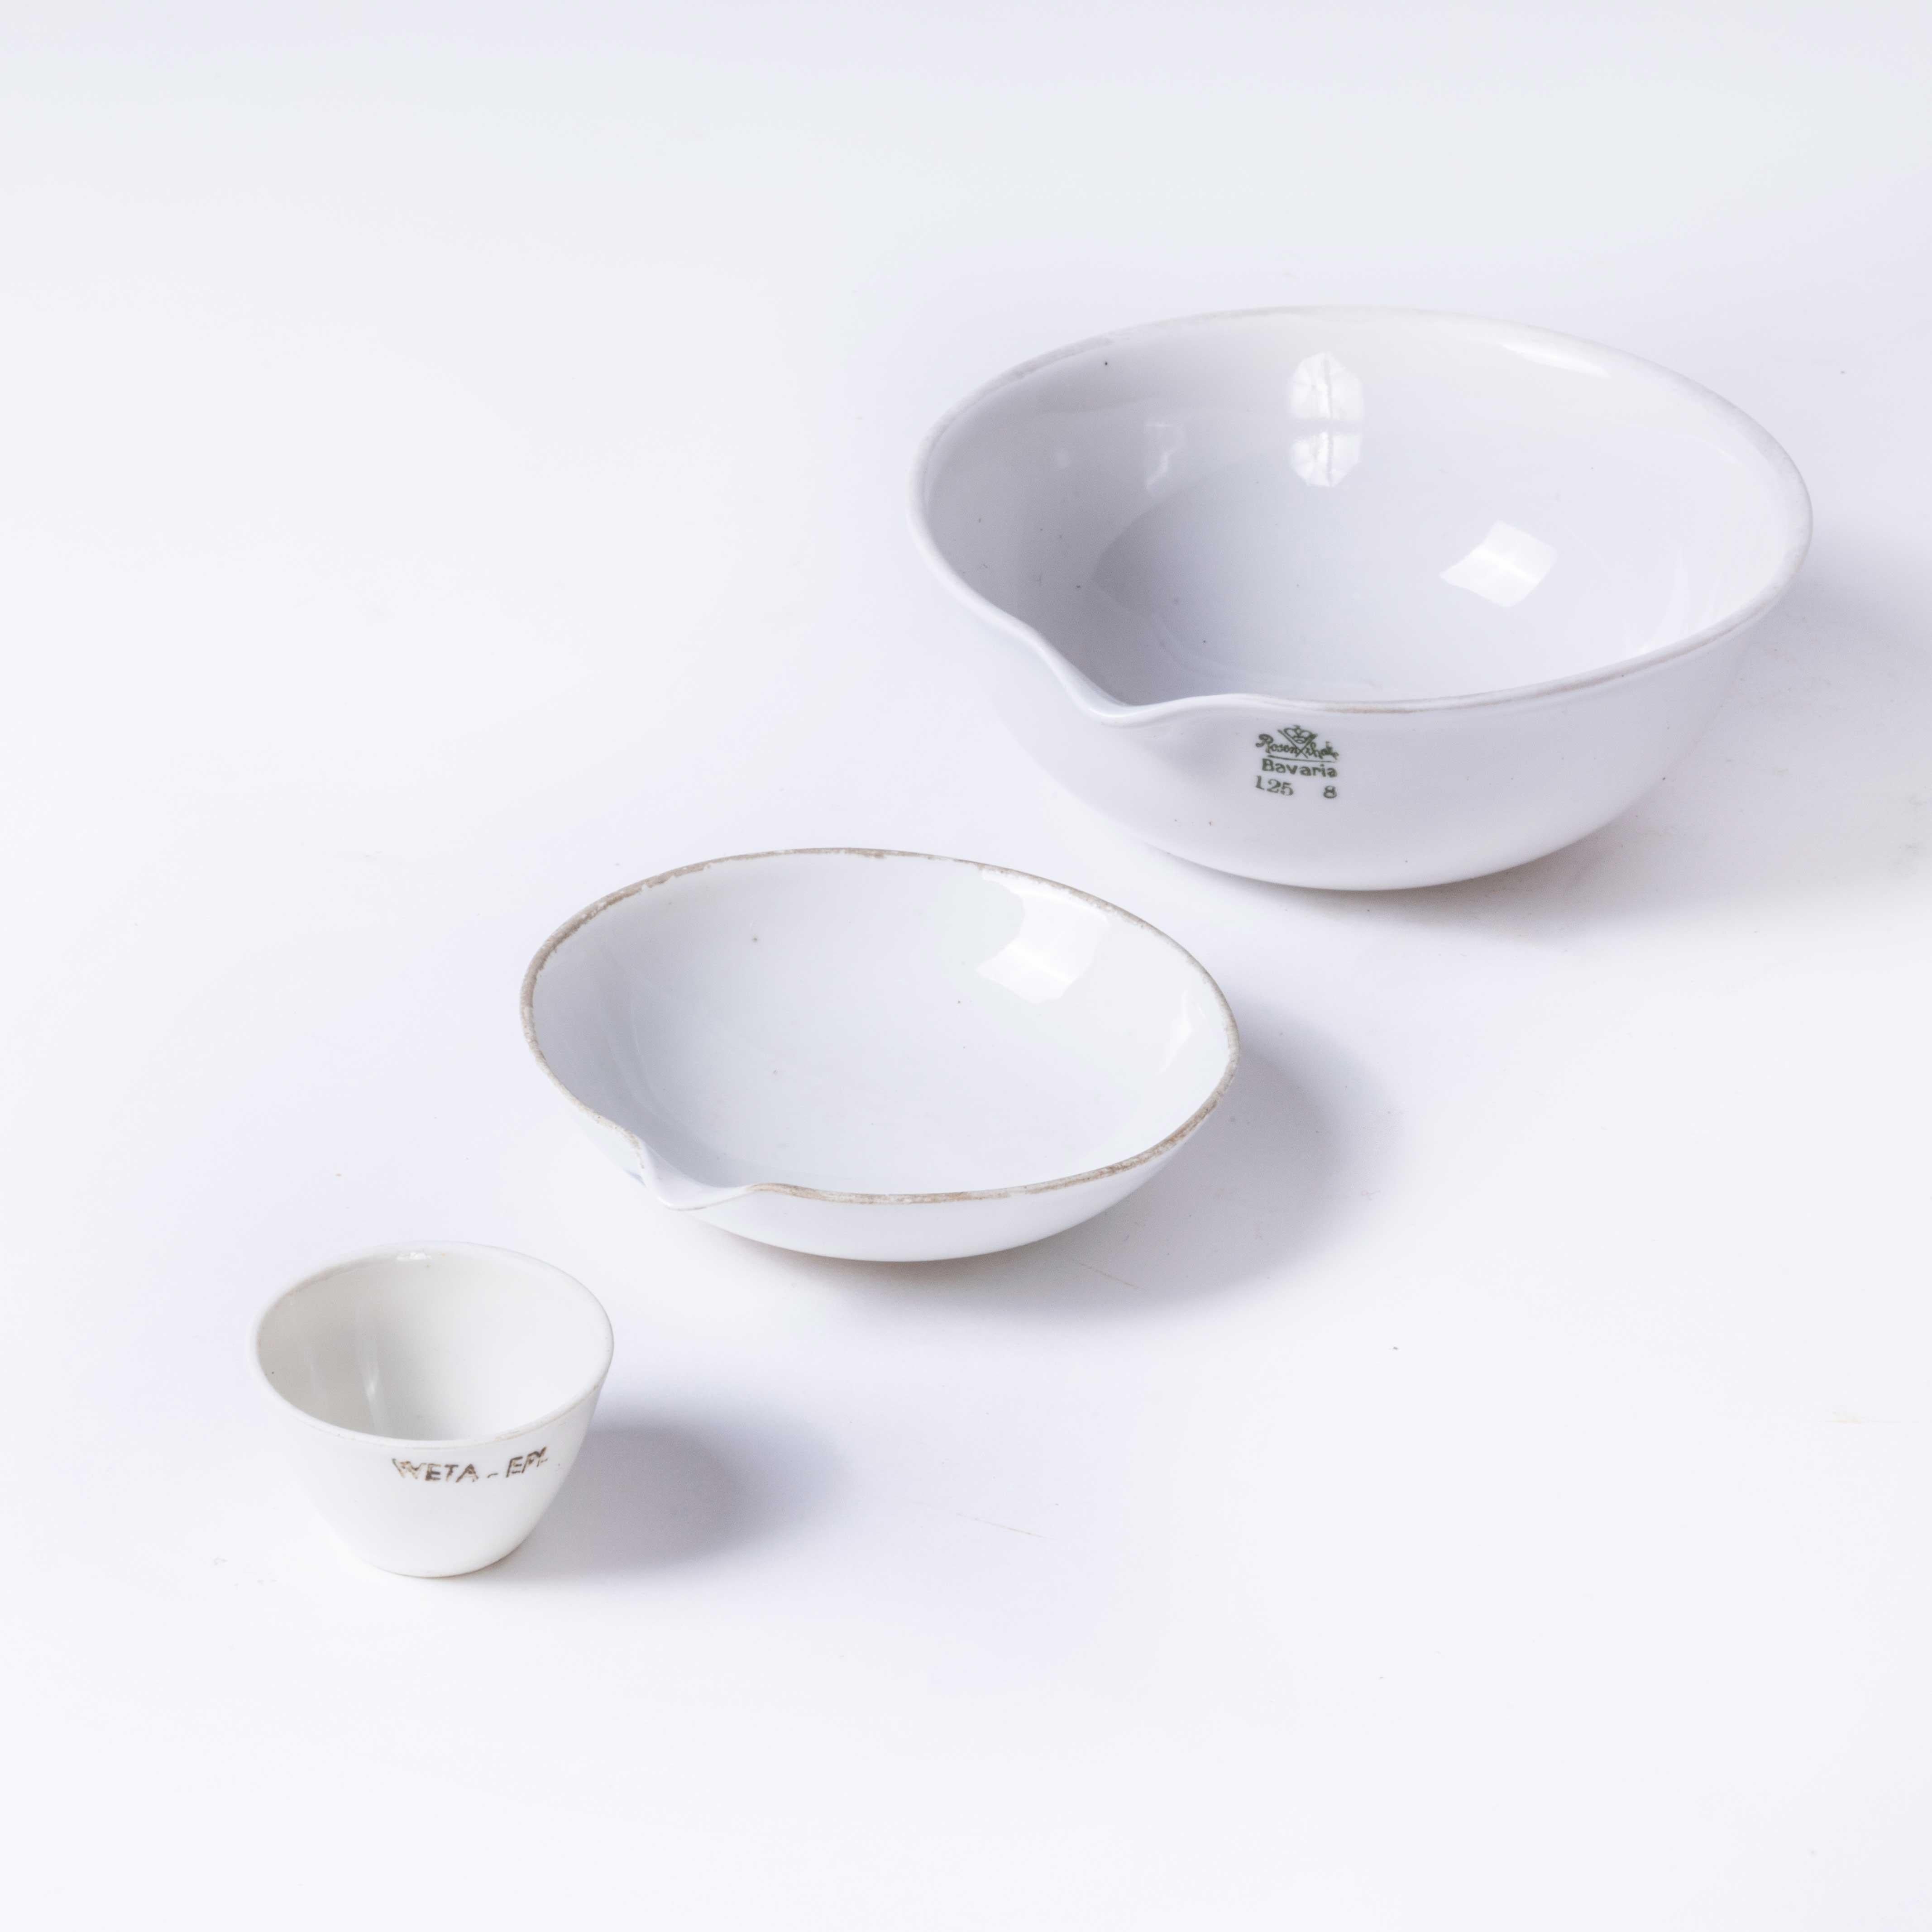 Czech light porcelain white bowls – set of three
Czech light porcelain white bowls – set of three. Two of these beautiful bowls have spouts for pouring. The three are all different sizes from approximately 4cm to 10cm diameter. Sourced as crucuble